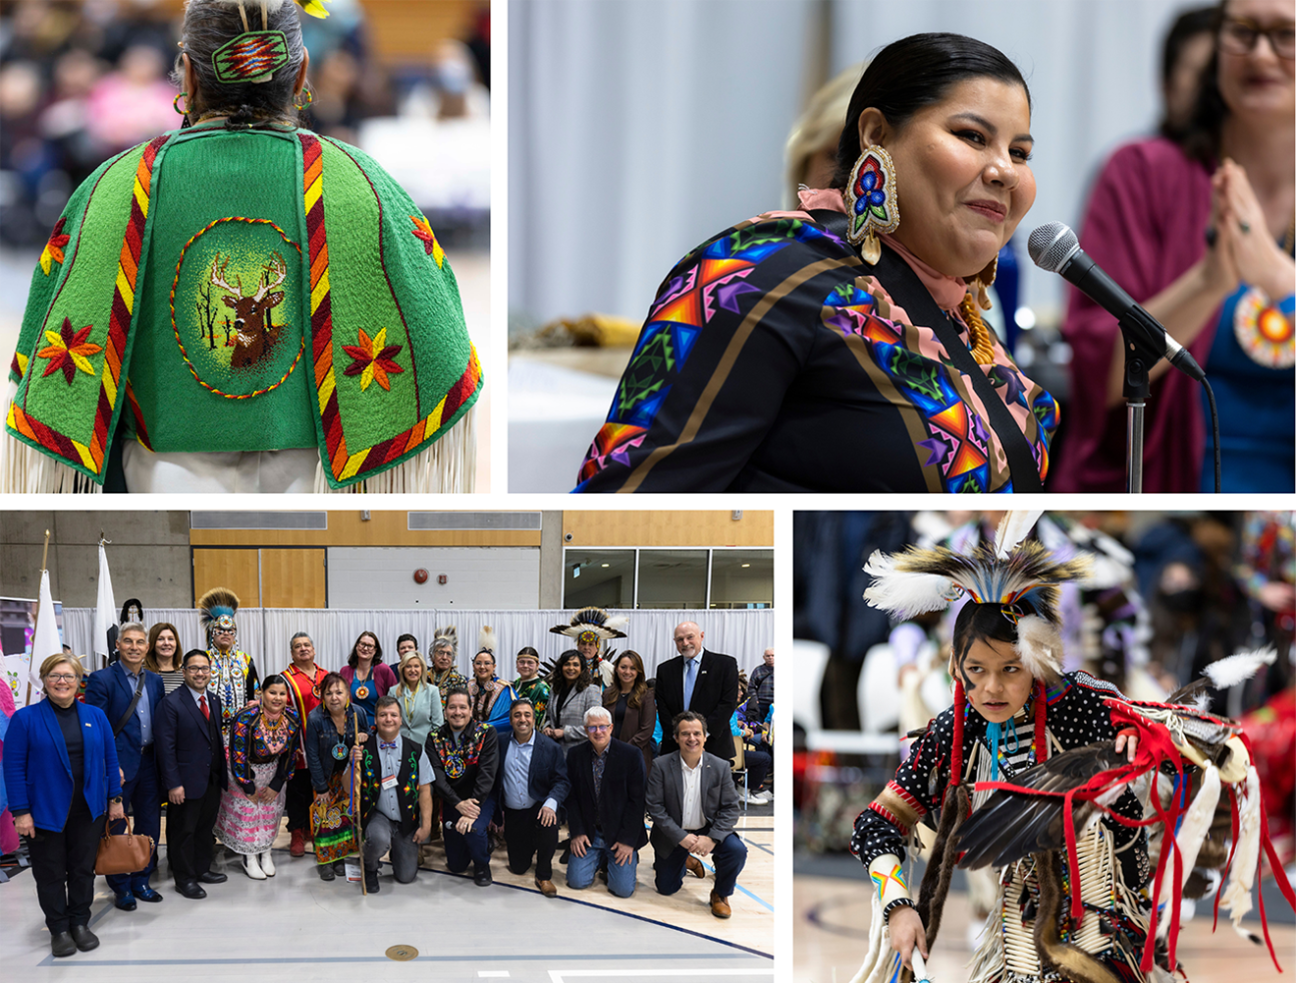 photo collage shows an Indigenous person wearing traditional clothing embroidered with a deer, Tee Duke Director, Indigenous Initiatives at University of Toronto Mississauga, a young child dancing at the powwow and a group photo of the organizers of the powwow